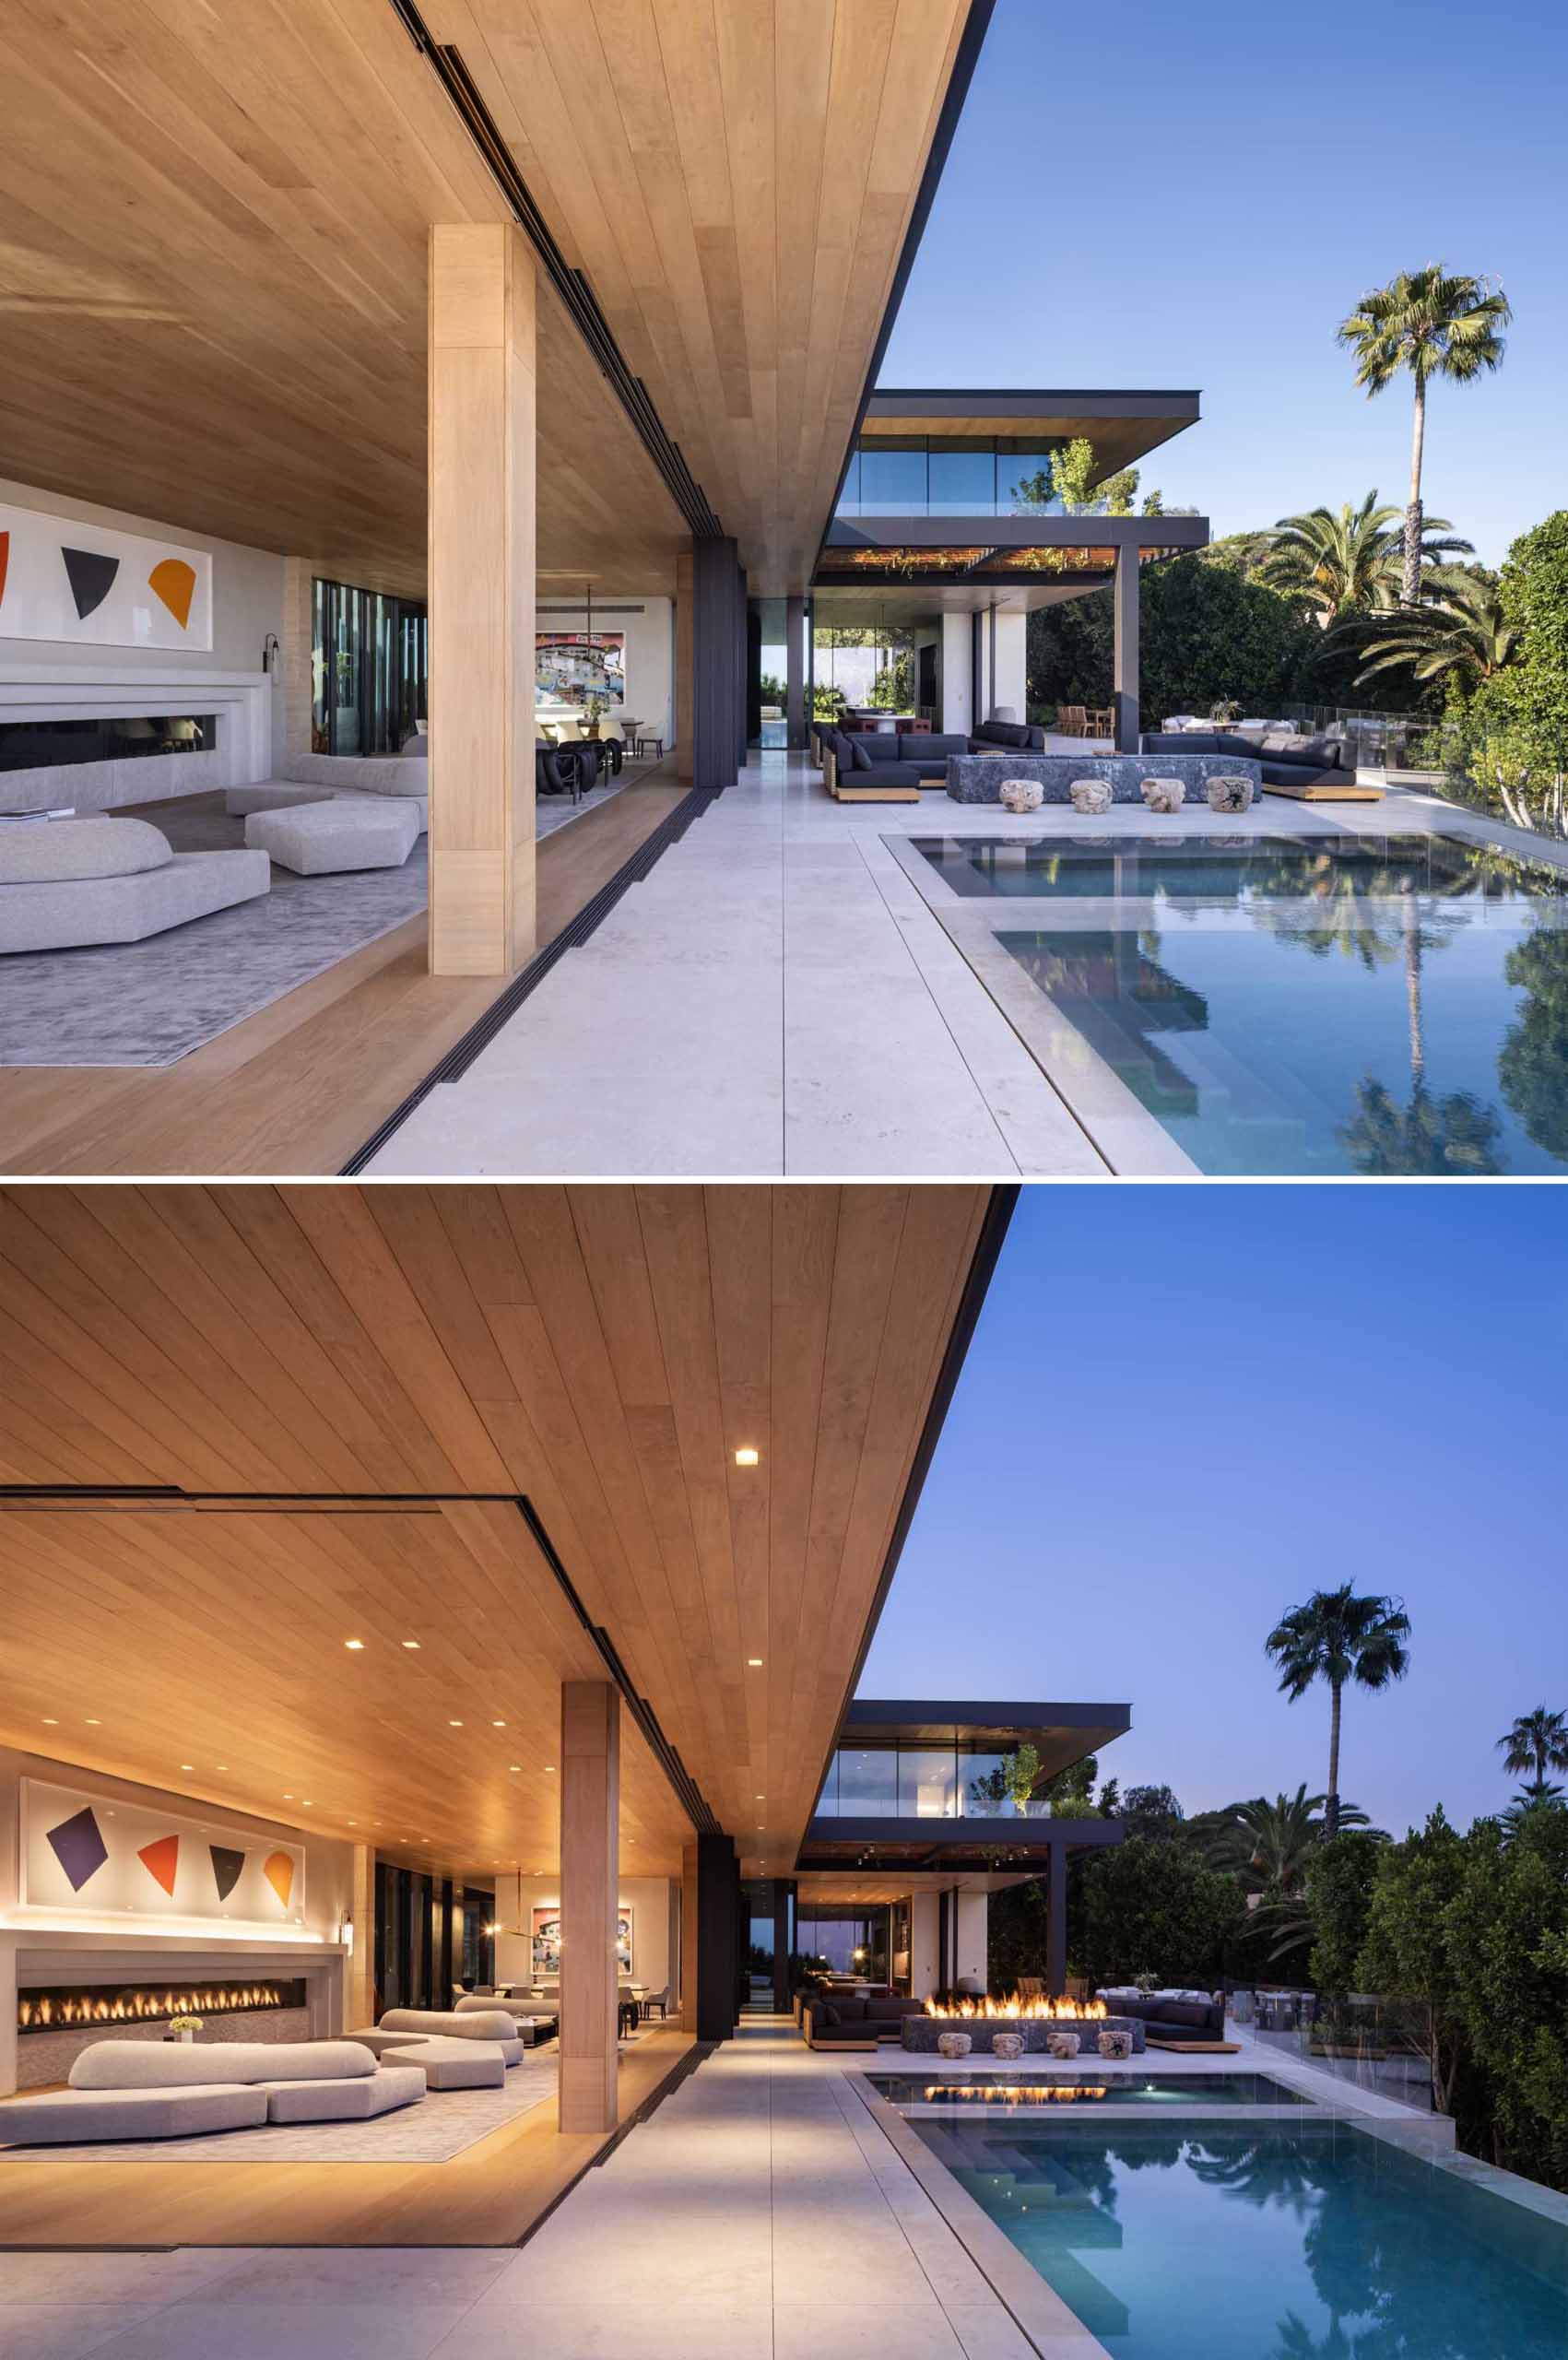 A modern home with a large living room that opens to a deck and swimming pool.